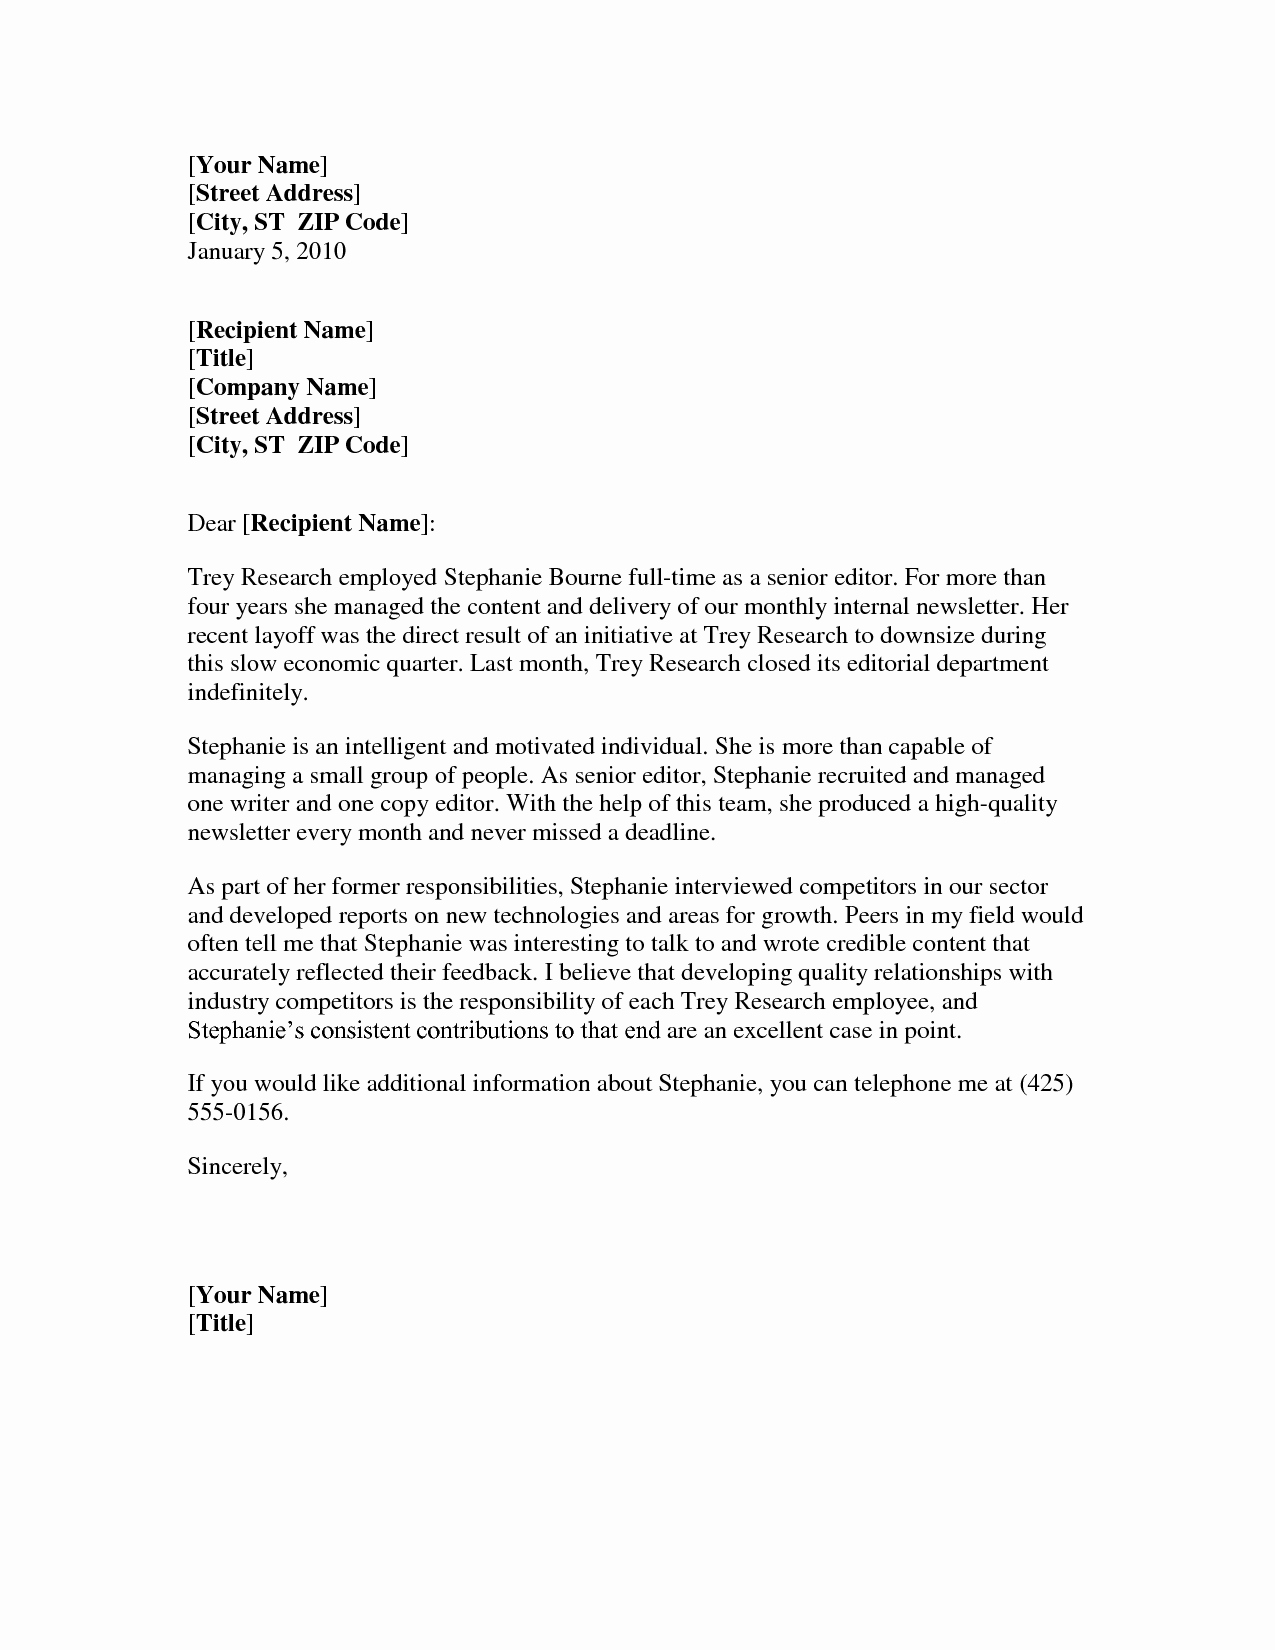 Business Letter Of Recommendation Template New Professional Reference Letter Template Word – Business